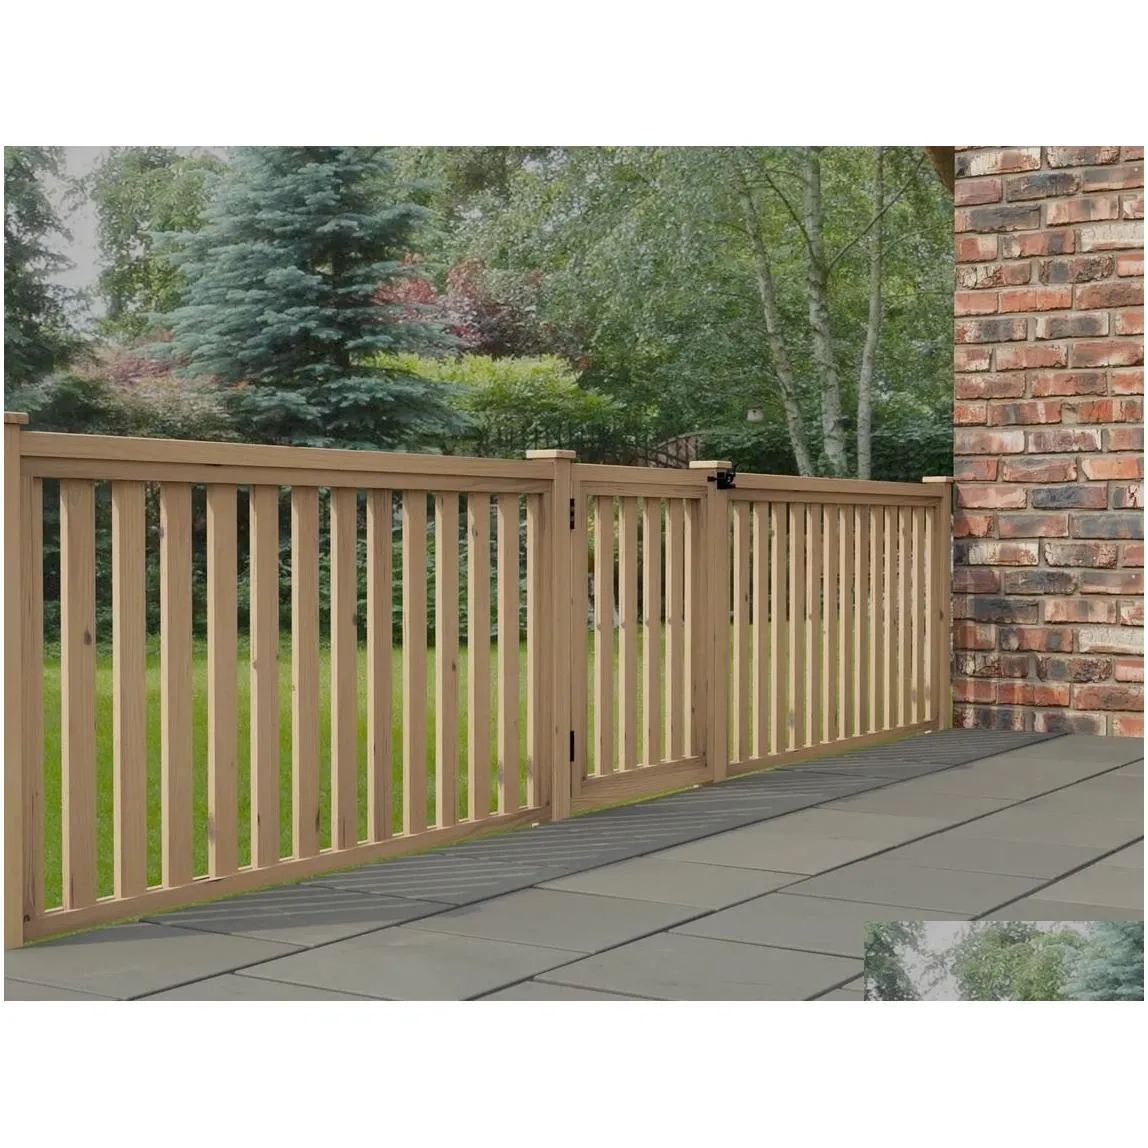 modular garden fencing and gate system 950mm high diy woodwork plans only no materials uk metric